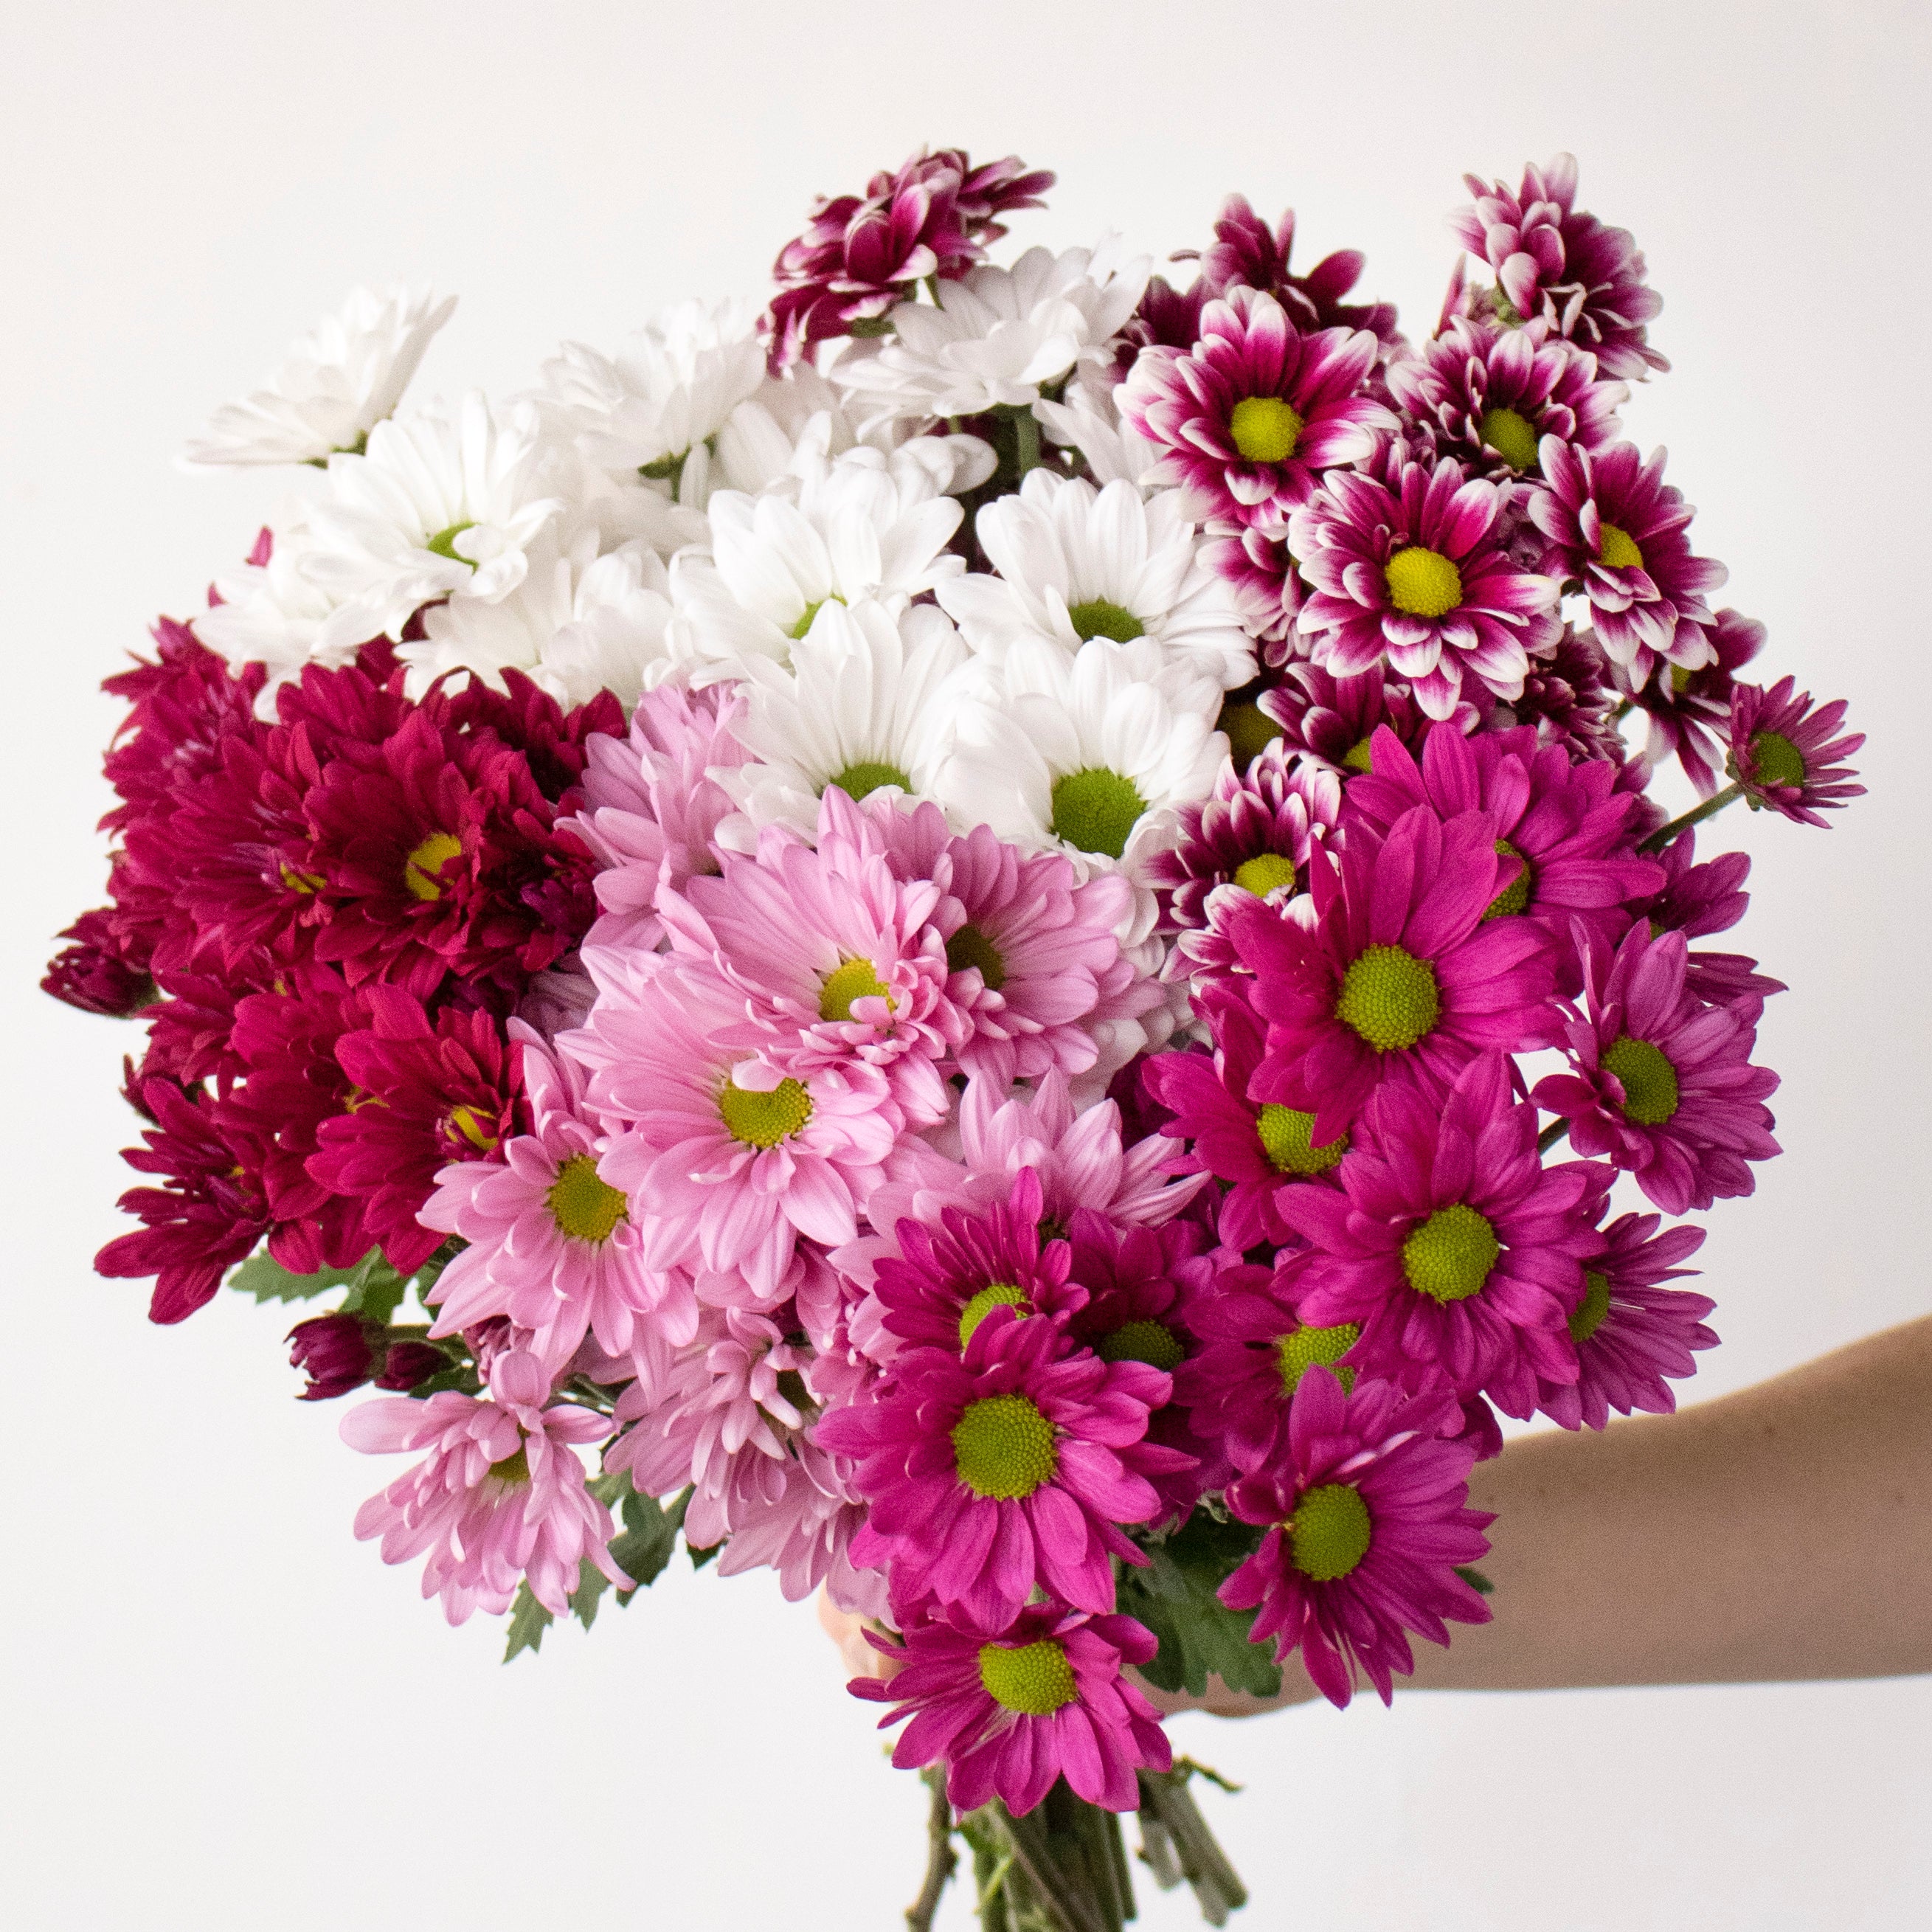 pink, purple and white daisies in a bouquet being held in hand